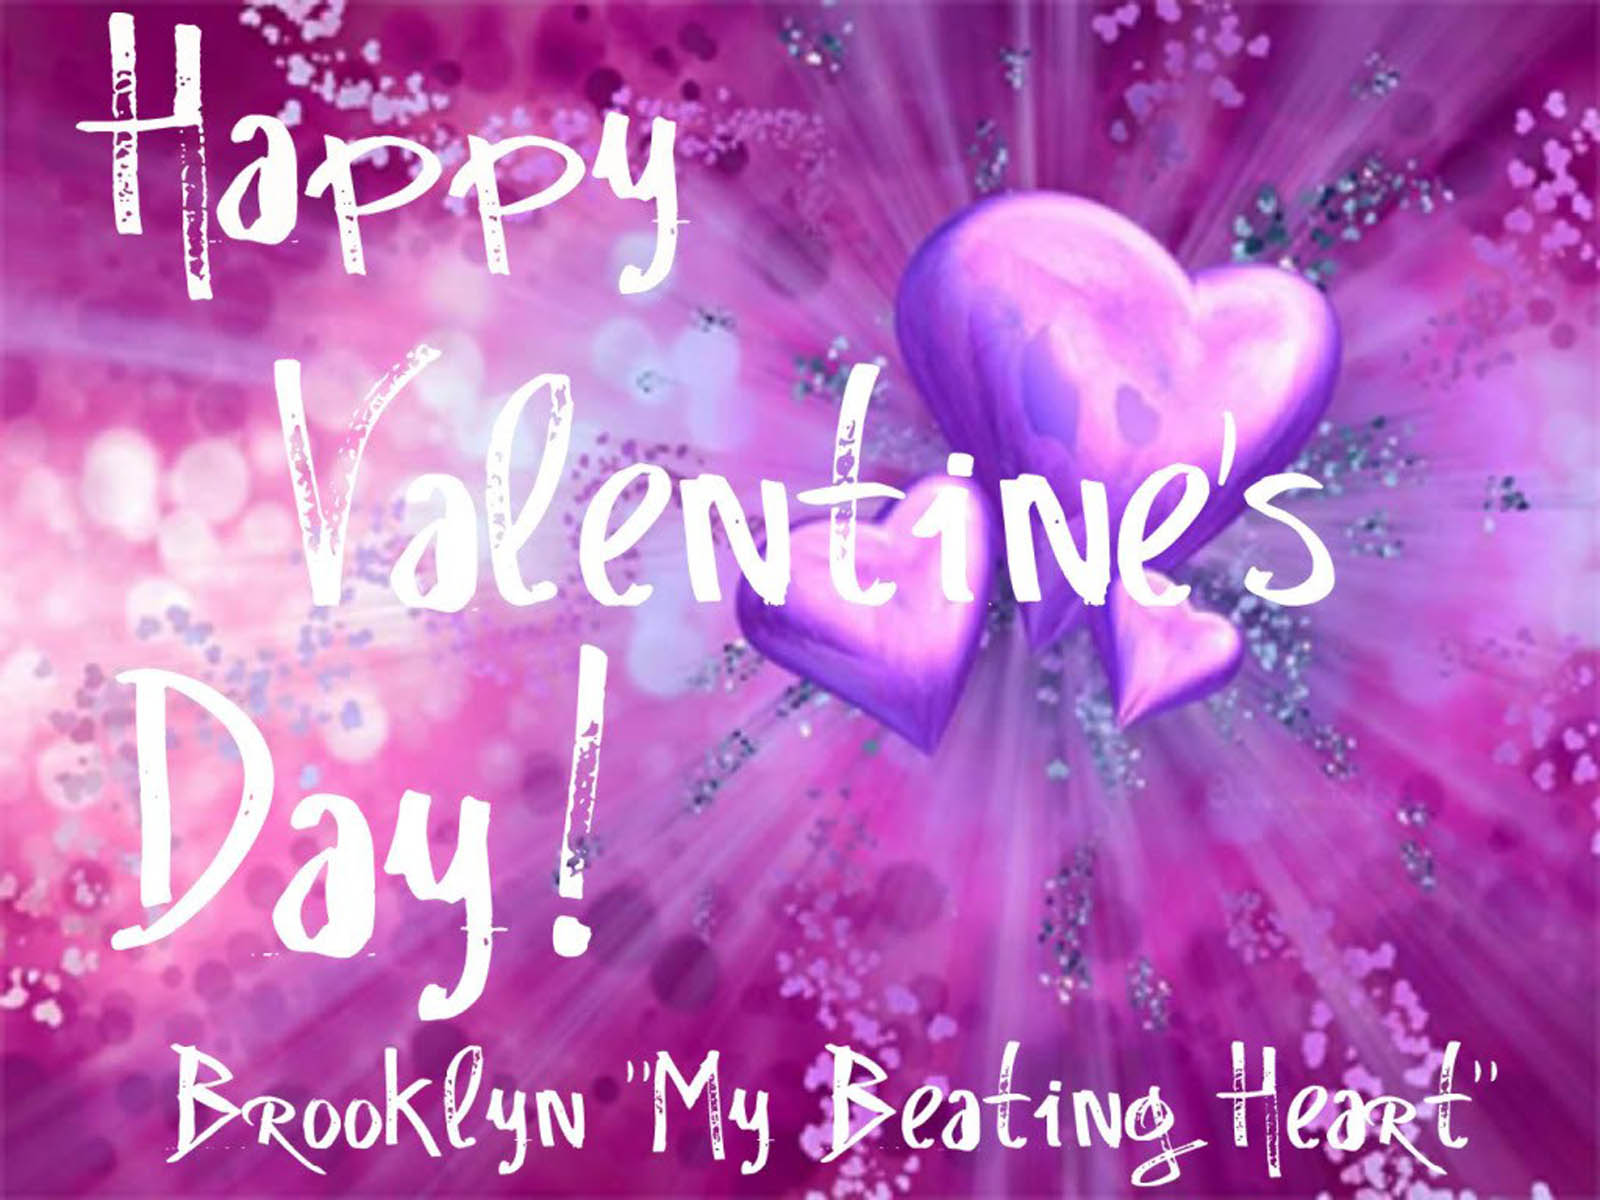 Tag Valentines Day Desktop WallpapersBackgrounds Photos Images and 1600x1200